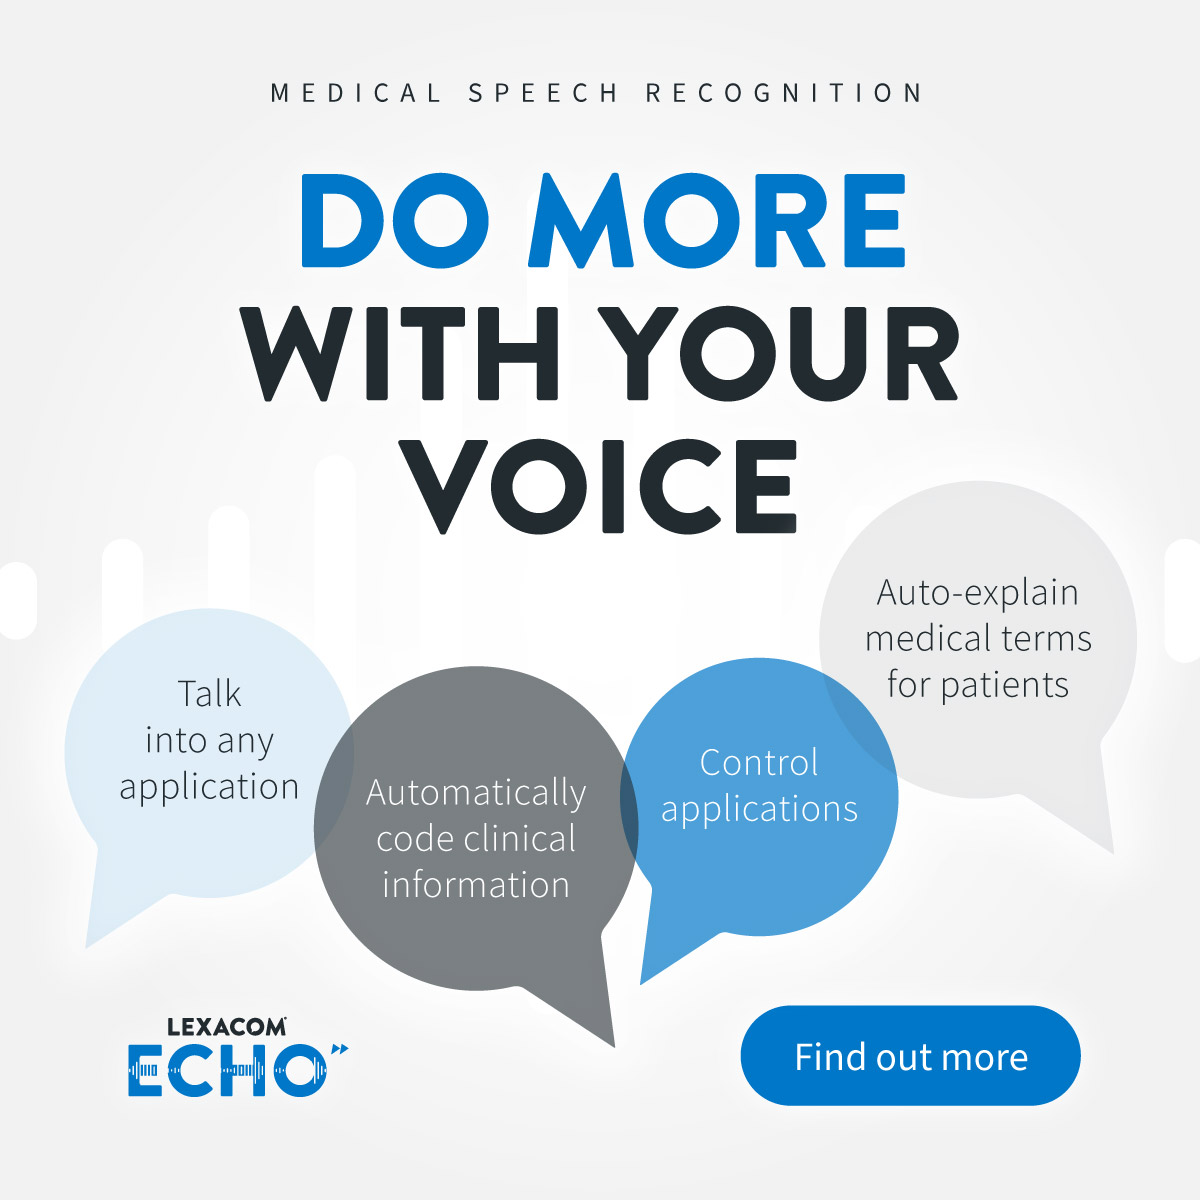 Save time and increase productivity with #speechrecognition

✓ Speak straight into clinical systems
✓ Explain medical terms for patients
✓ Code clinical information

See it for yourself - book a demonstration at lexacom.co.uk/lexacom-produc…

#nhs #primarycare #generalpractice